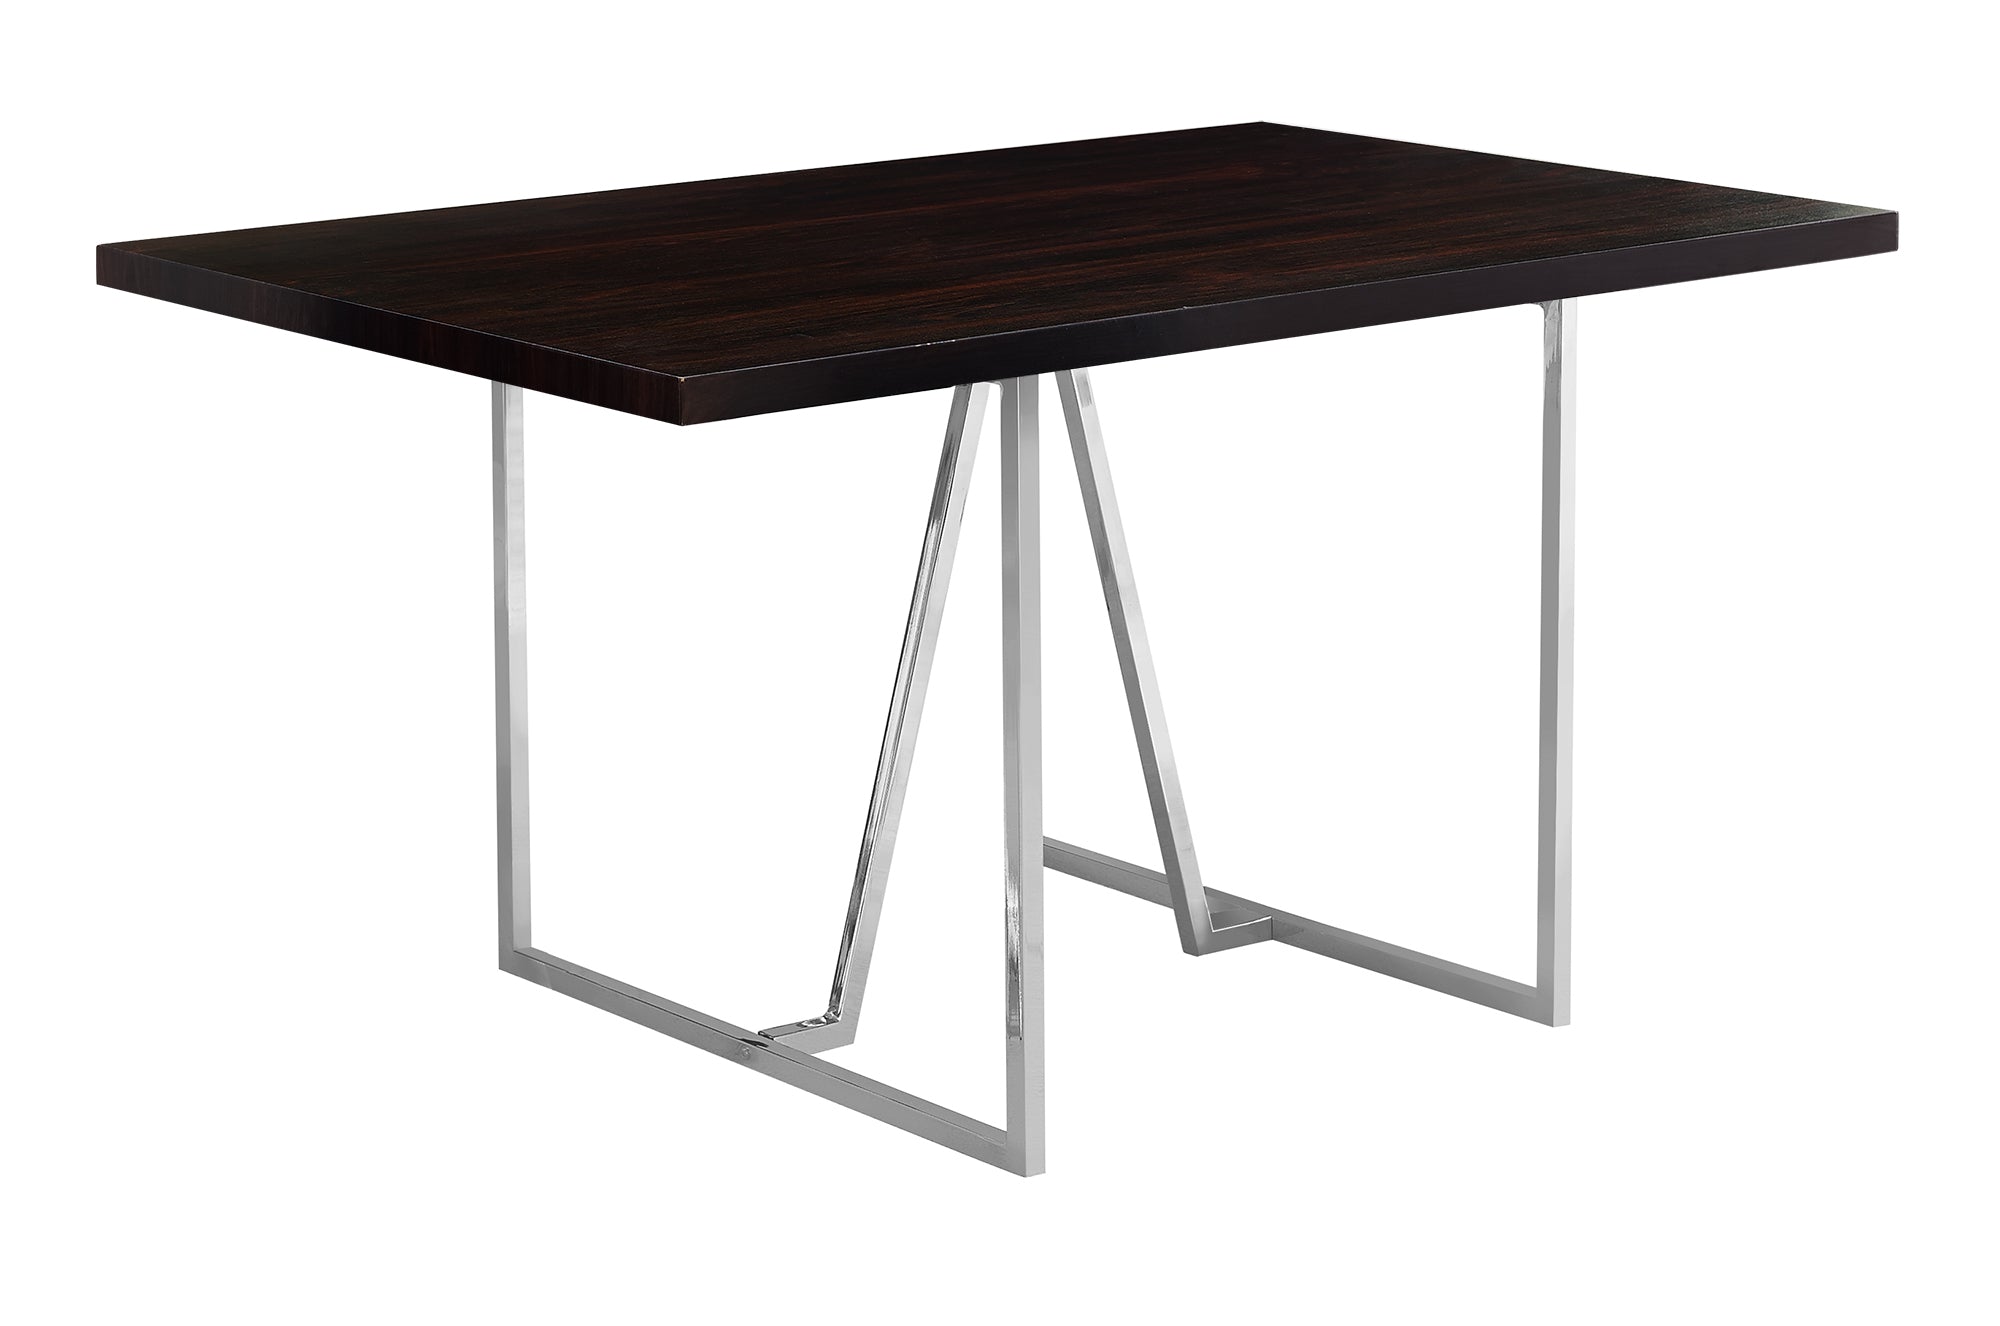 Modern Home Dining Table - 36"X 60" With U-Shaped Legs (Espresso)